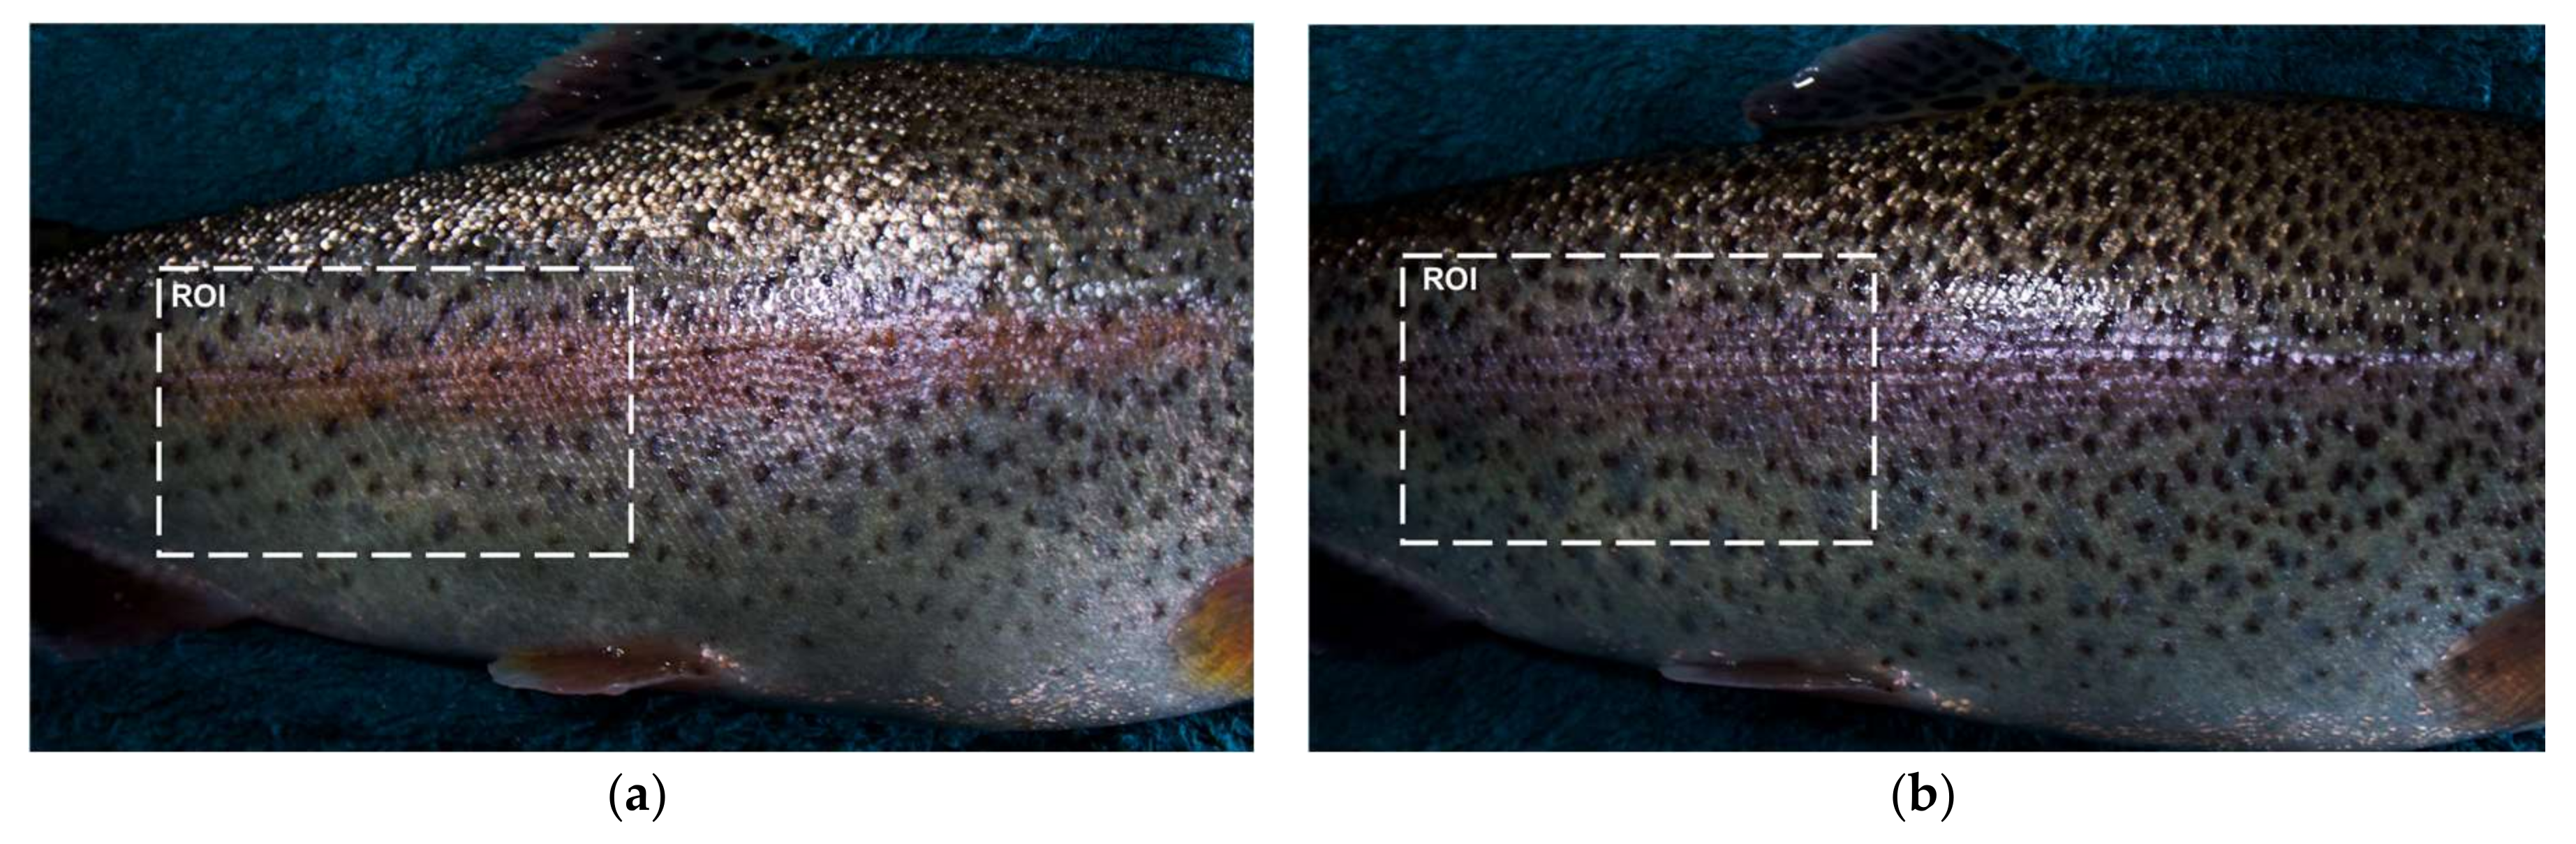 Sensors Free Full Text Comparative Performance Analysis Of Support Vector Machine Random Forest Logistic Regression And K Nearest Neighbours In Rainbow Trout Oncorhynchus Mykiss Classification Using Image Based Features Html